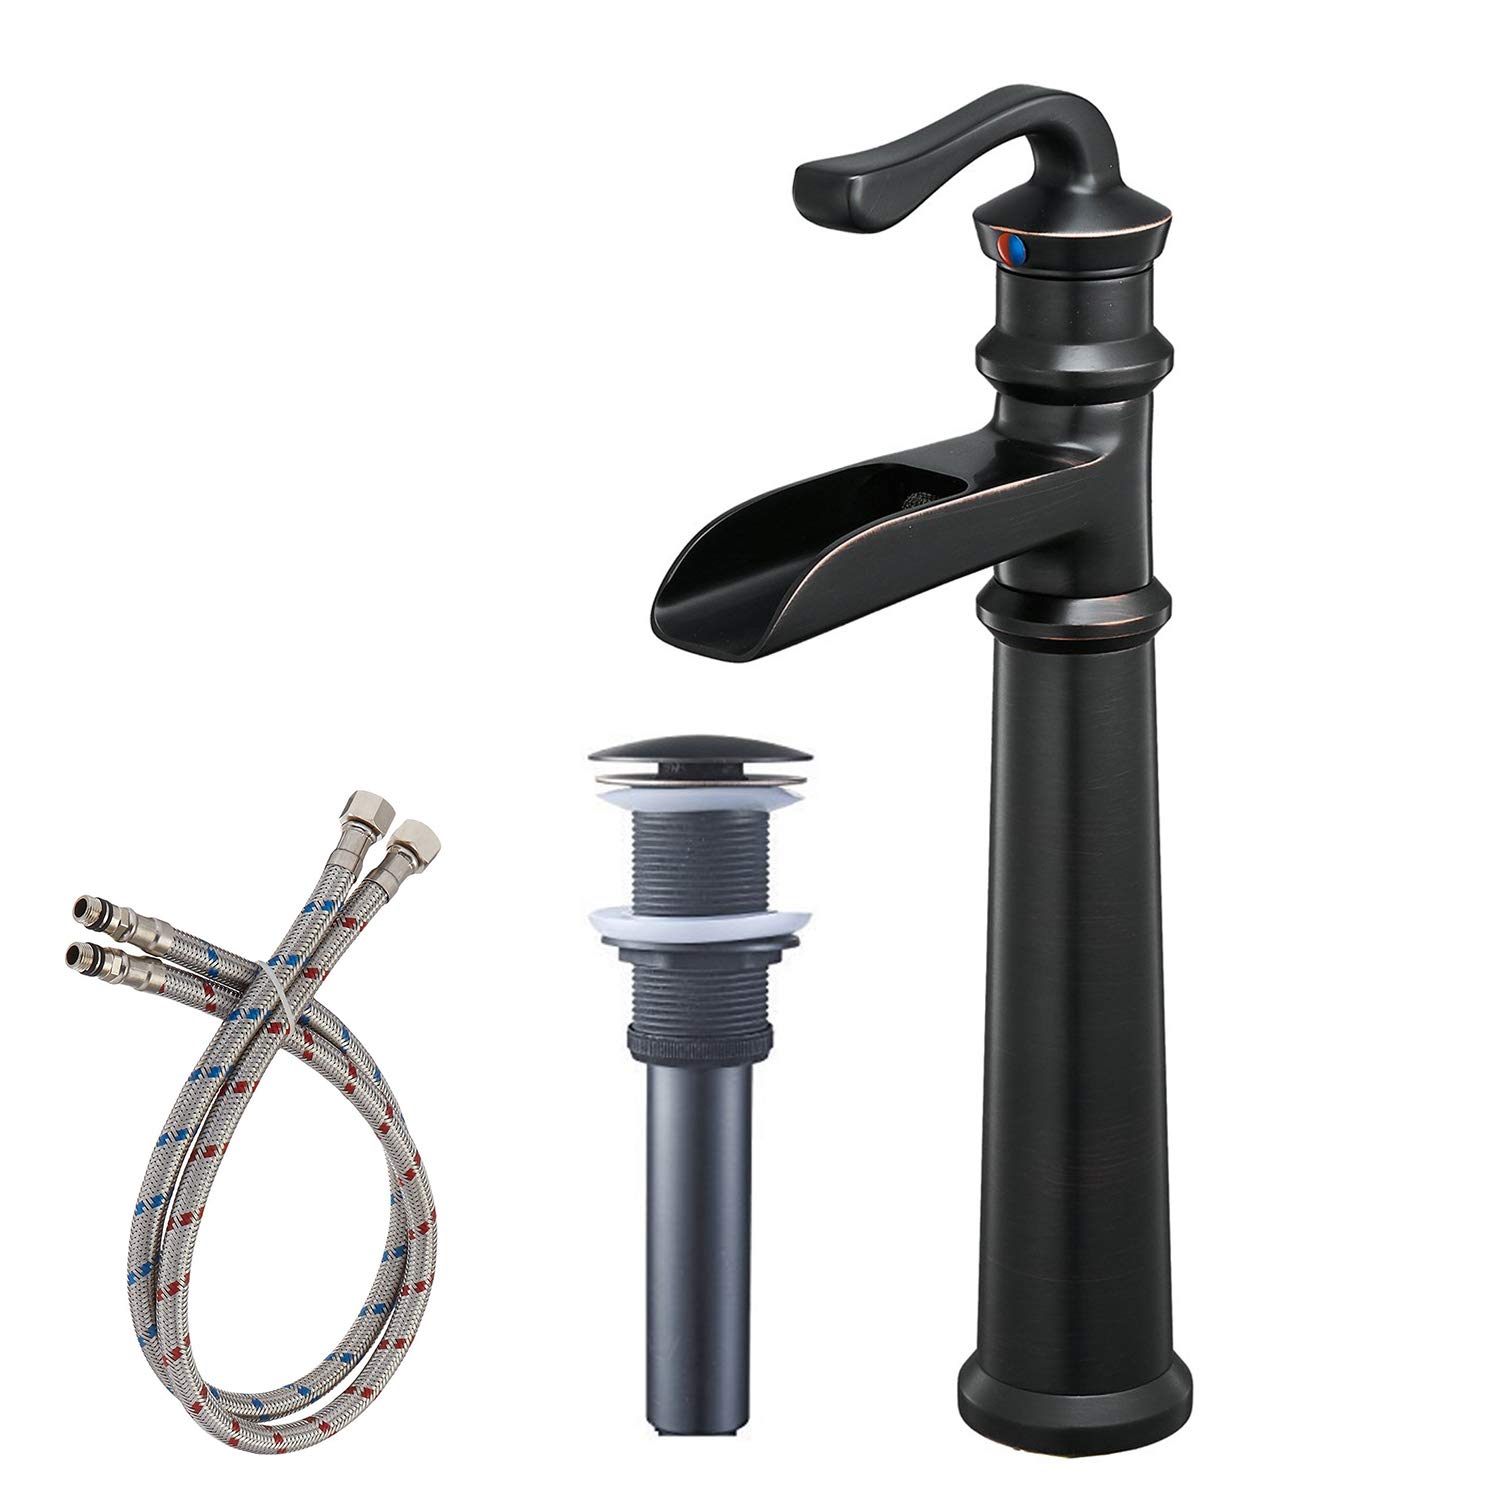 7" LED Bathroom Faucets Oil Rubbed Bronze Vessel Waterfall One Hole/Handle Taps 